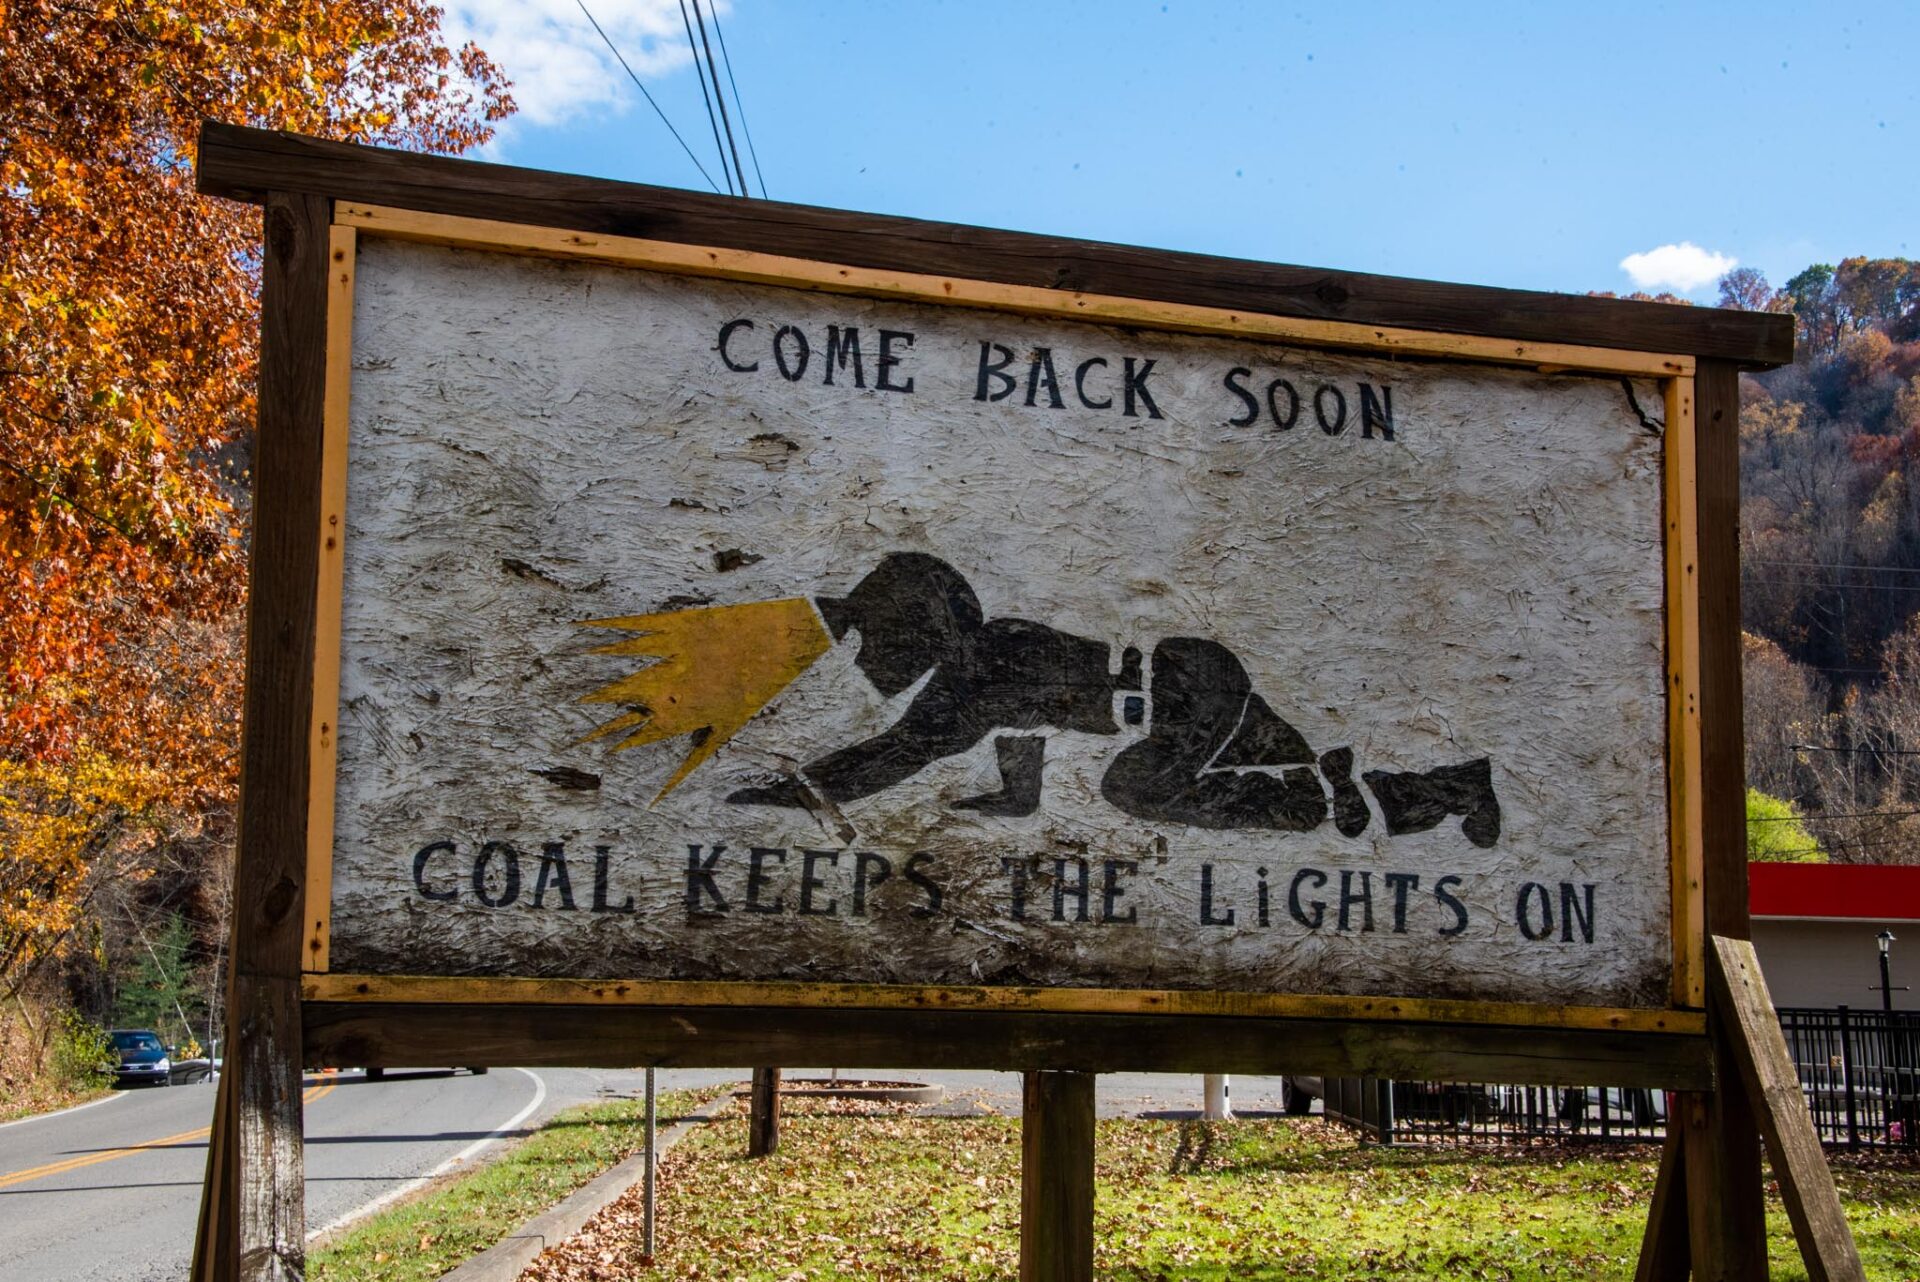 The Rise Of Advanced Black Lung, Inside Appalachia